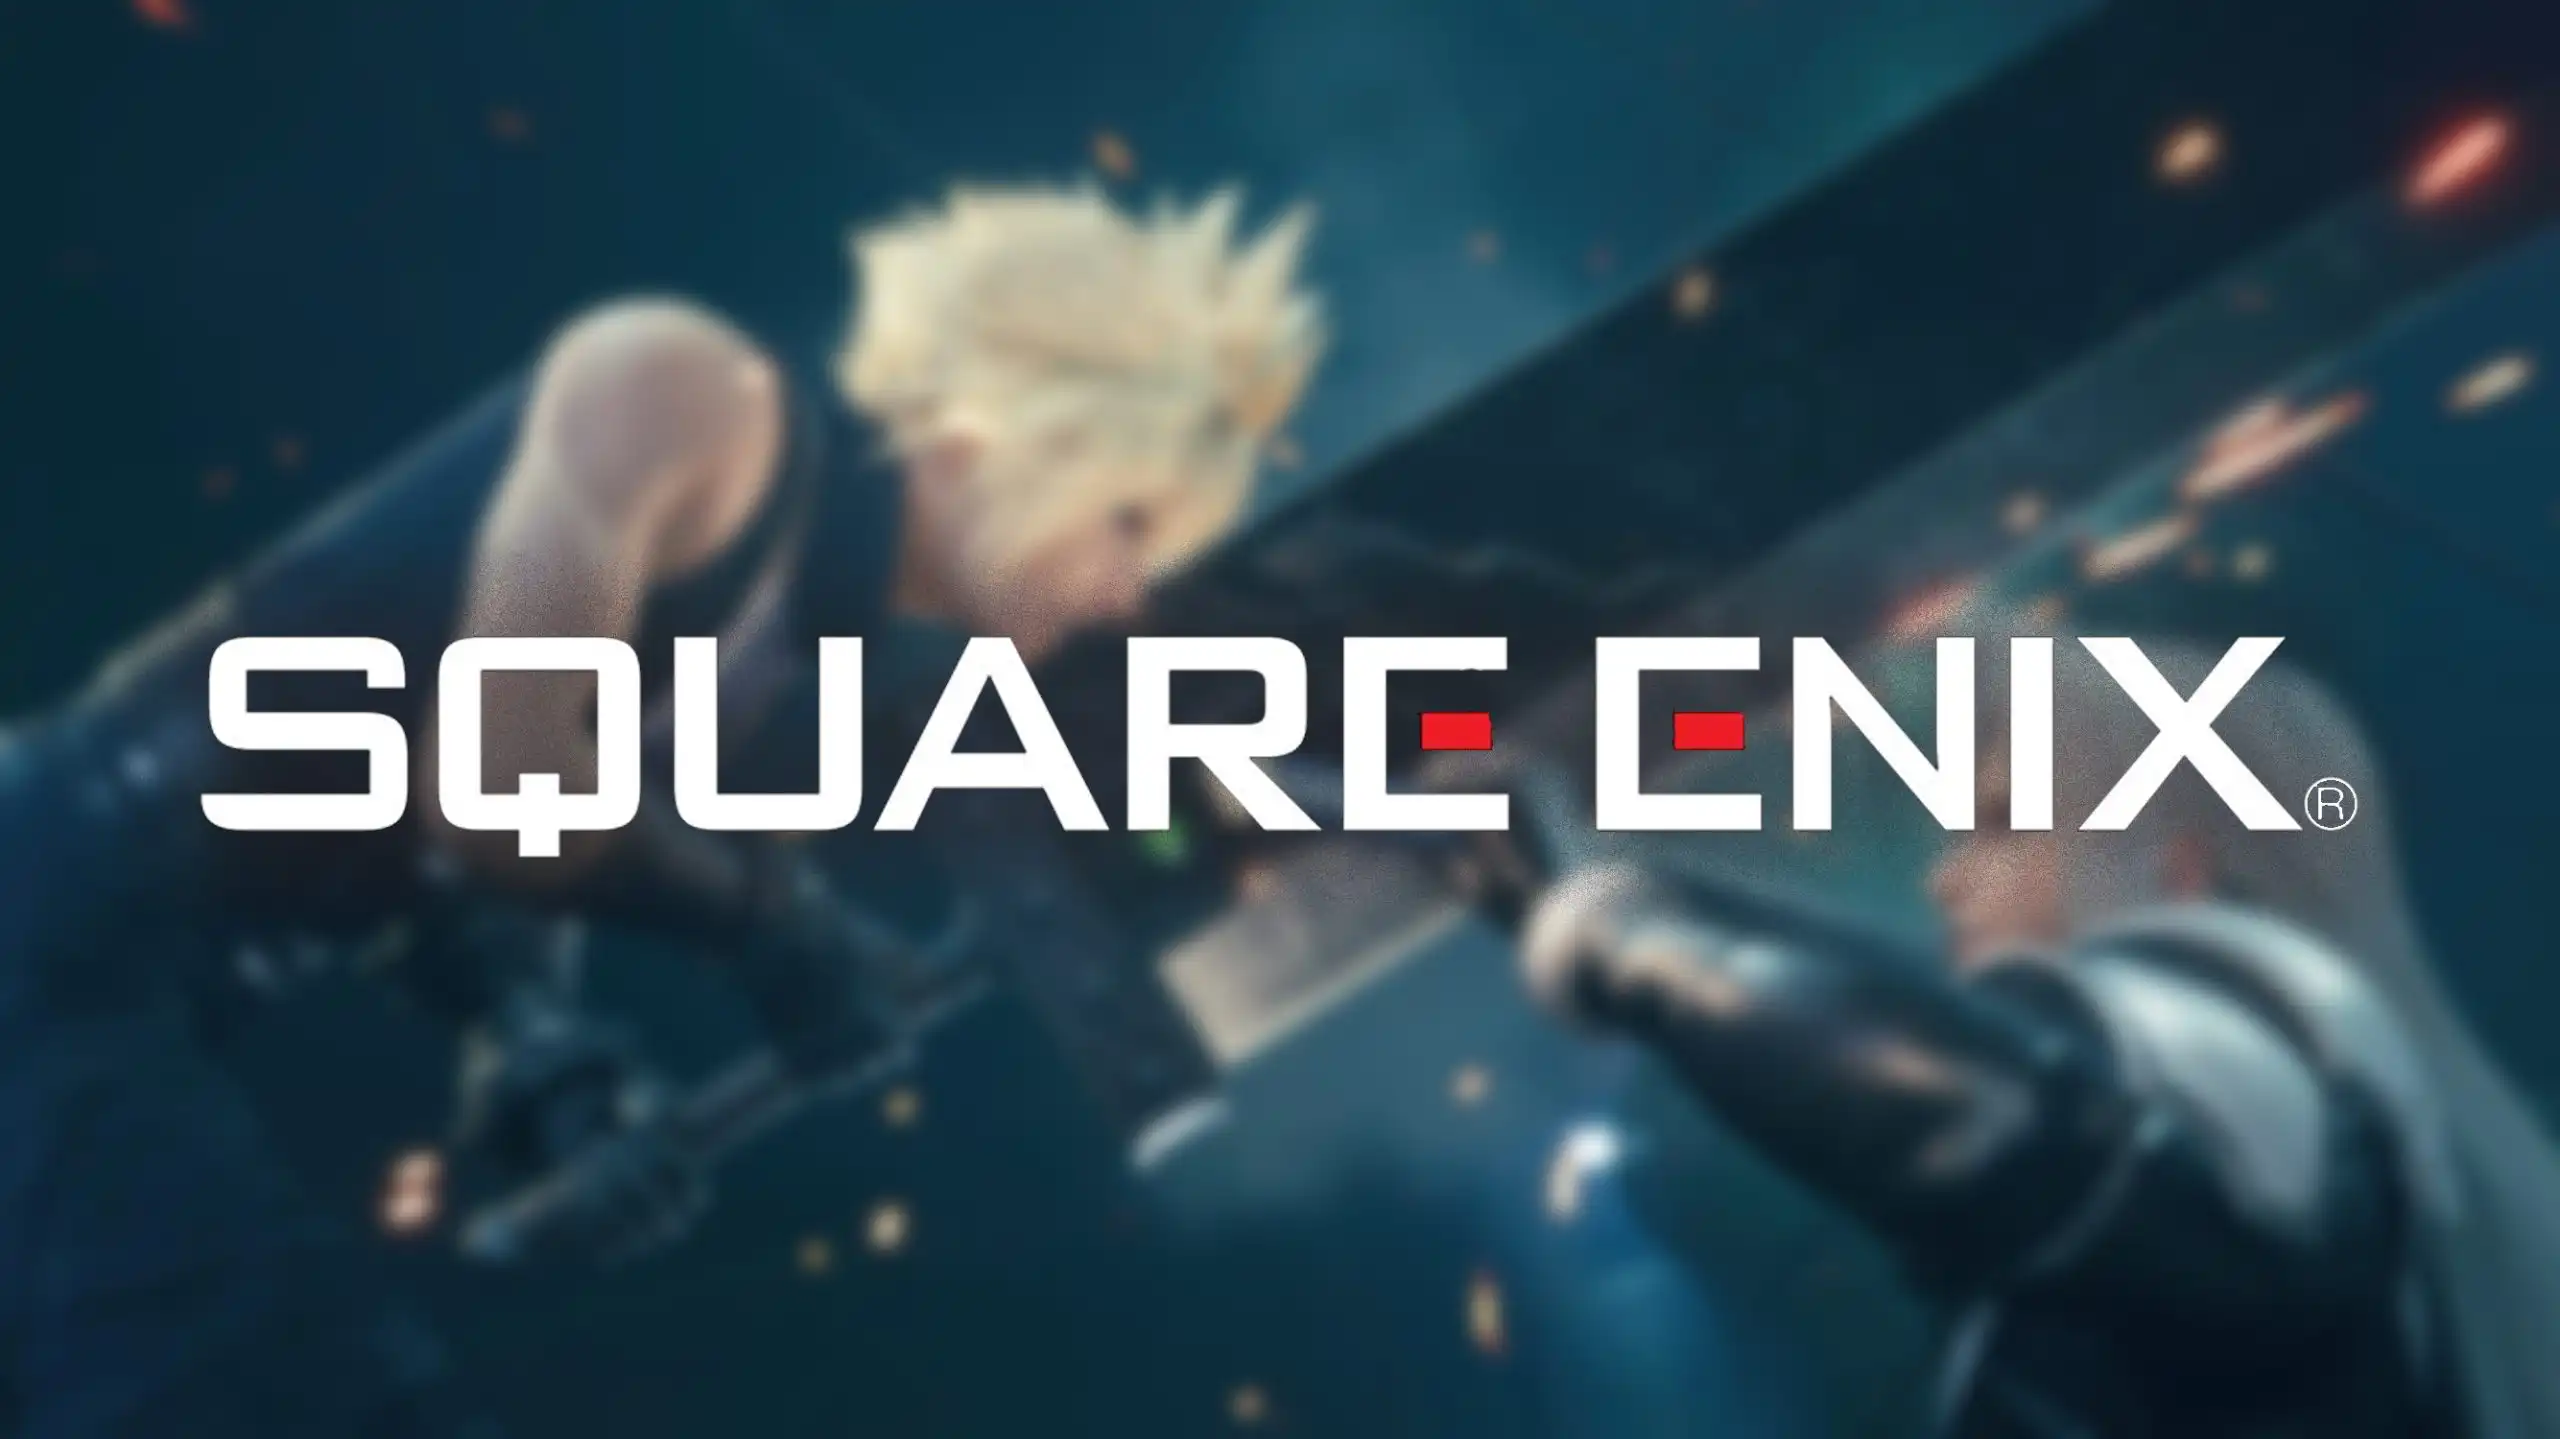 https://nftgames.net/wp-content/uploads/2023/03/Square-Enix-reveals-its-NFT-game-will-have-10000-characters.webp